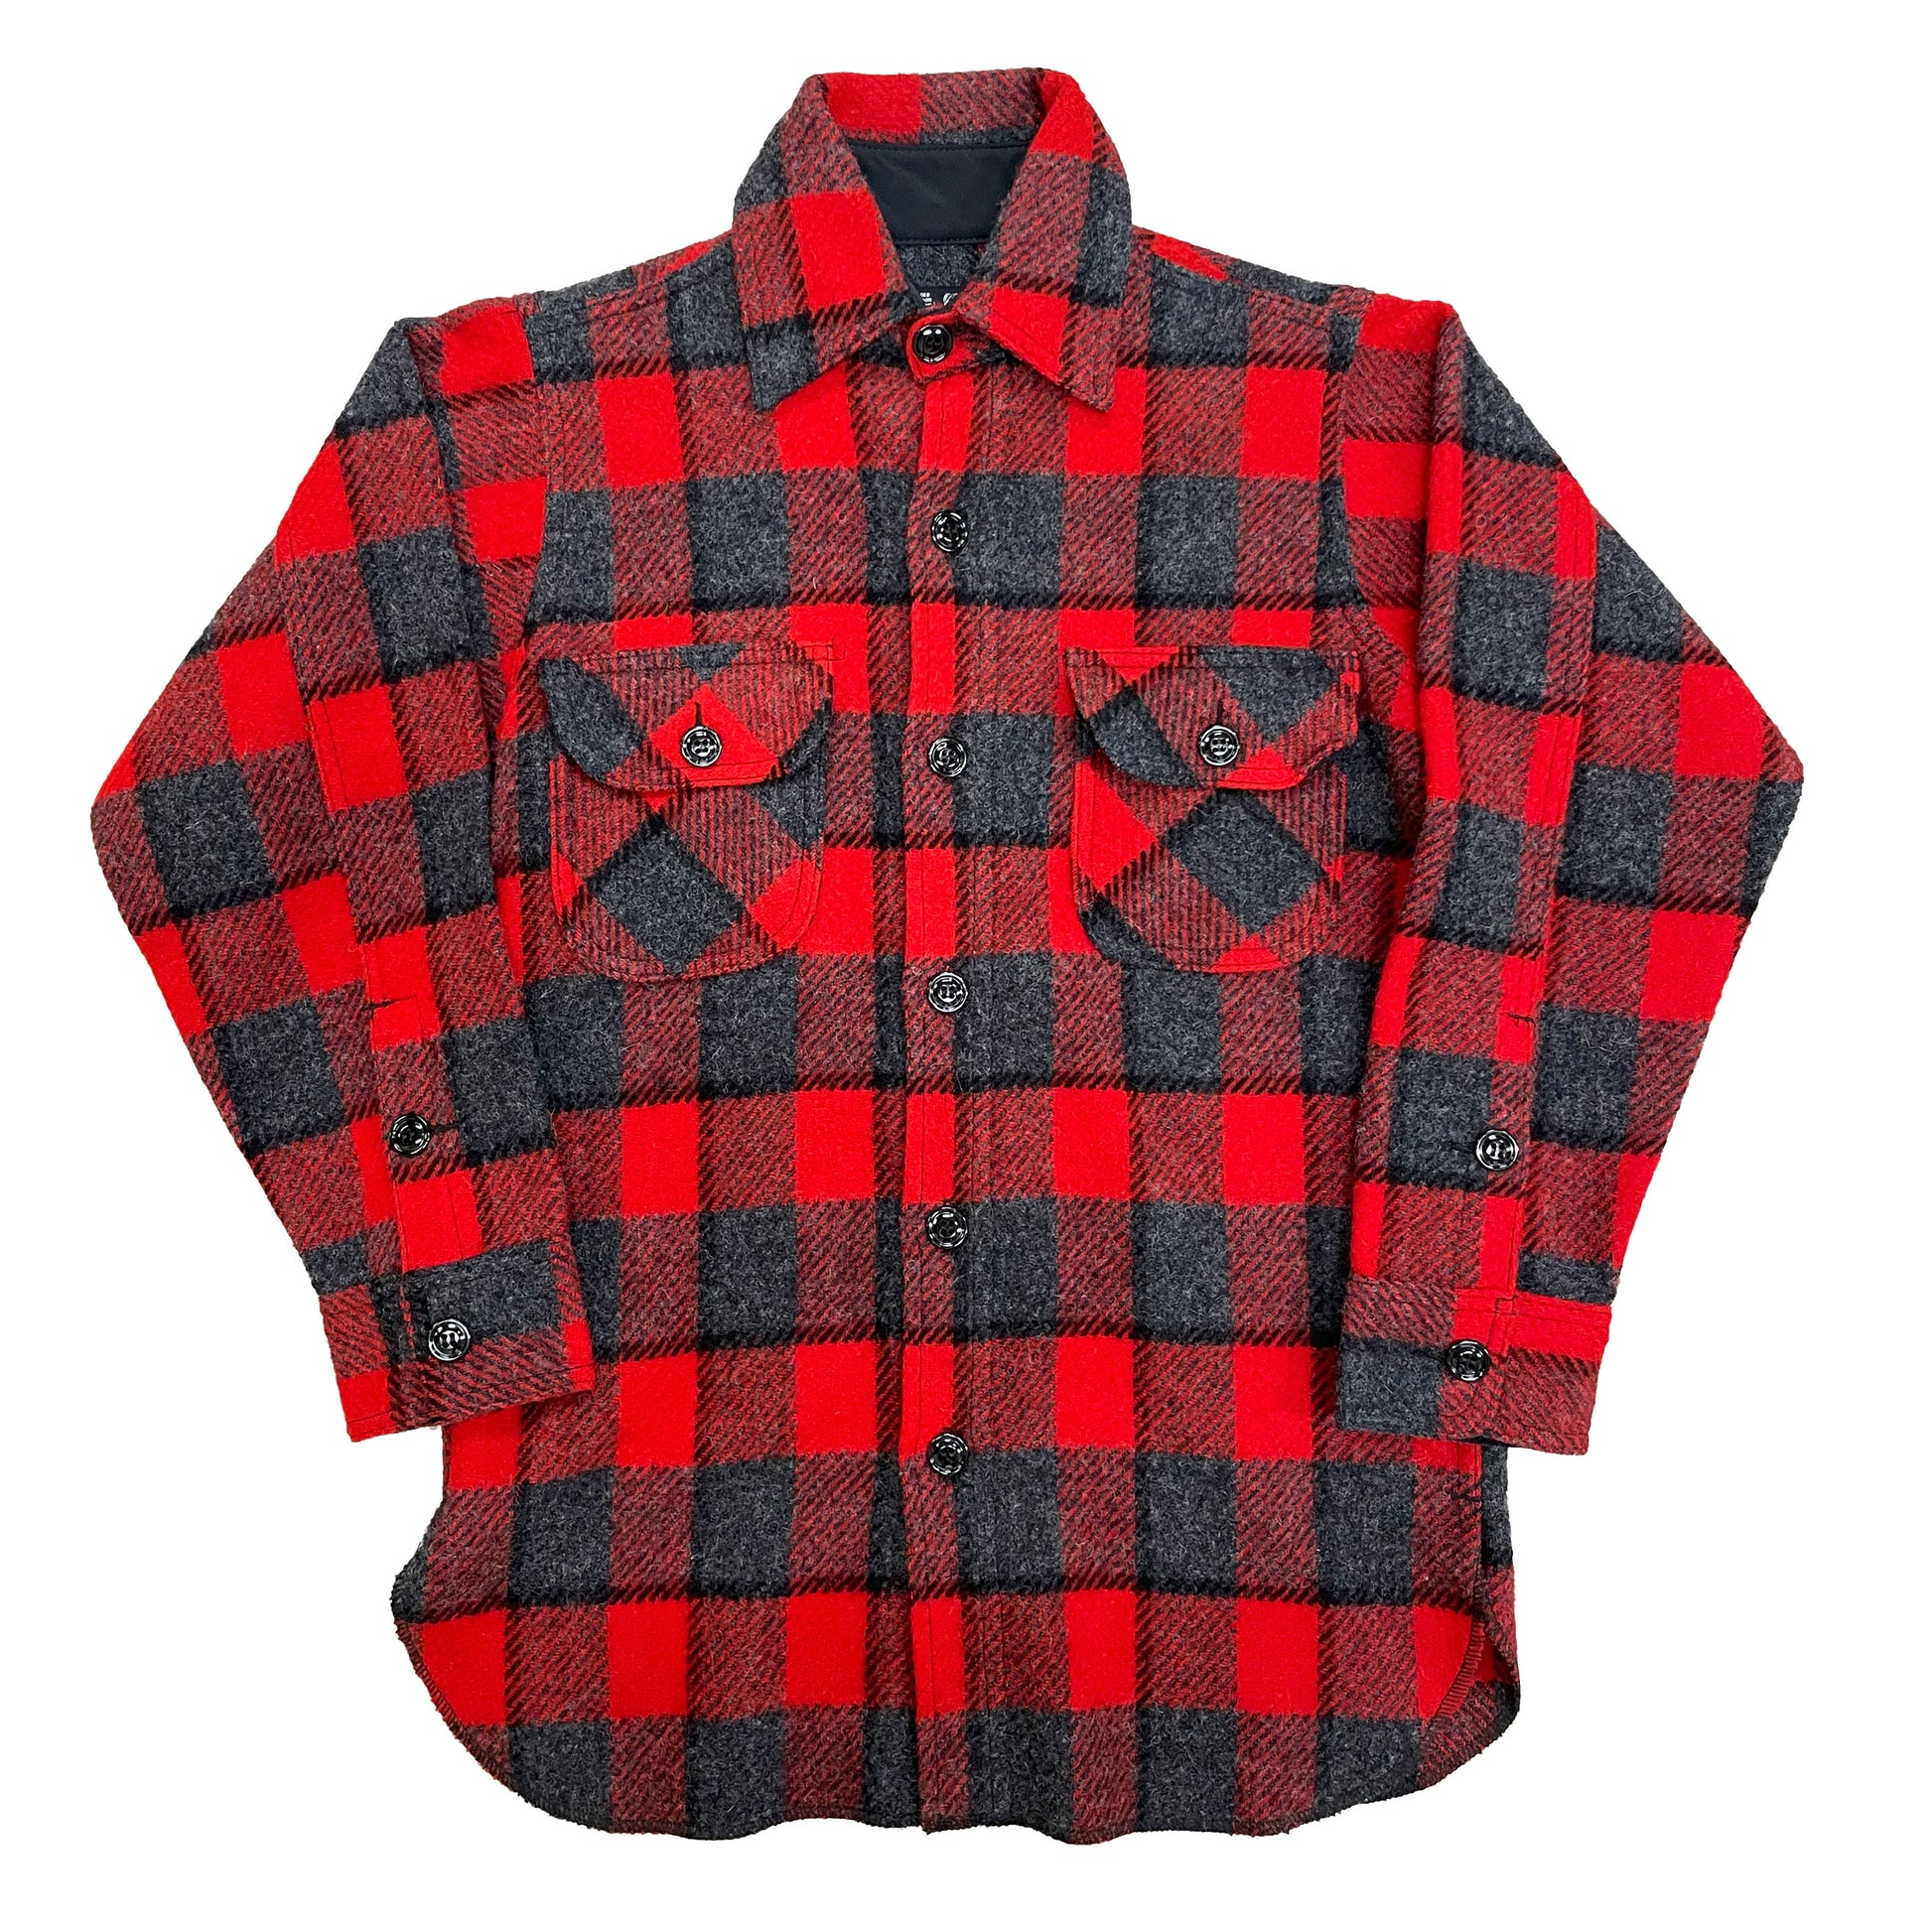 Long tail wool button down shirt in red ad gray plaid